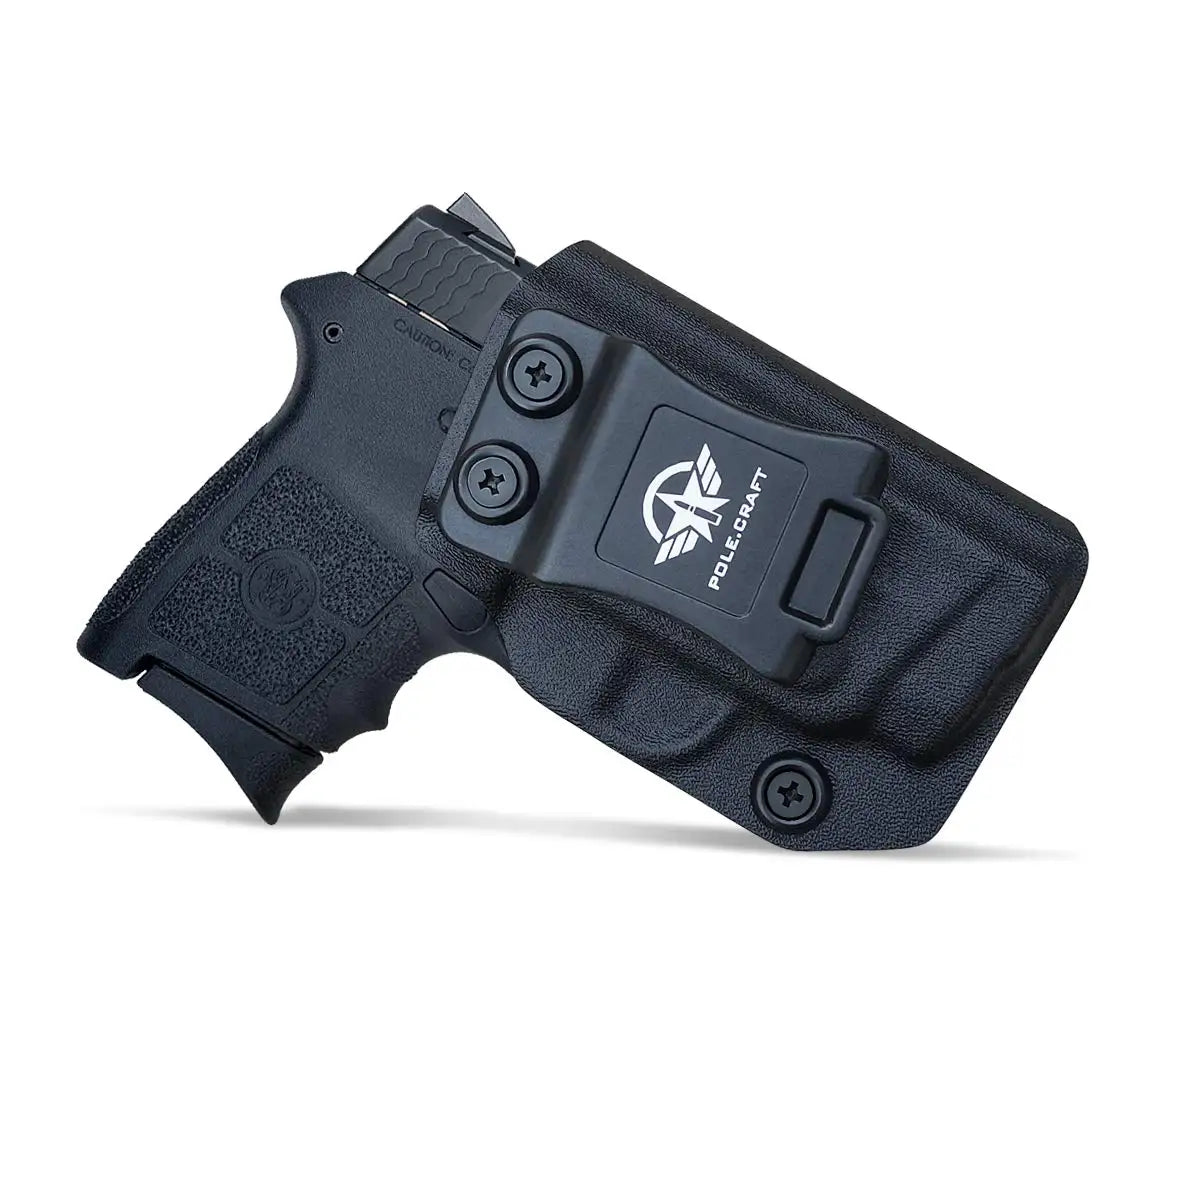 Bodyguard 380 Holster IWB Kydex Holster Custom Fit: Smith & Wesson M&P Bodyguard 380 / Bodyguard 380 with Integrated Laser Pistol - Inside Waistband Concealed Carry - Adj. Cant Retention - Cover Mag-Button - No Slip